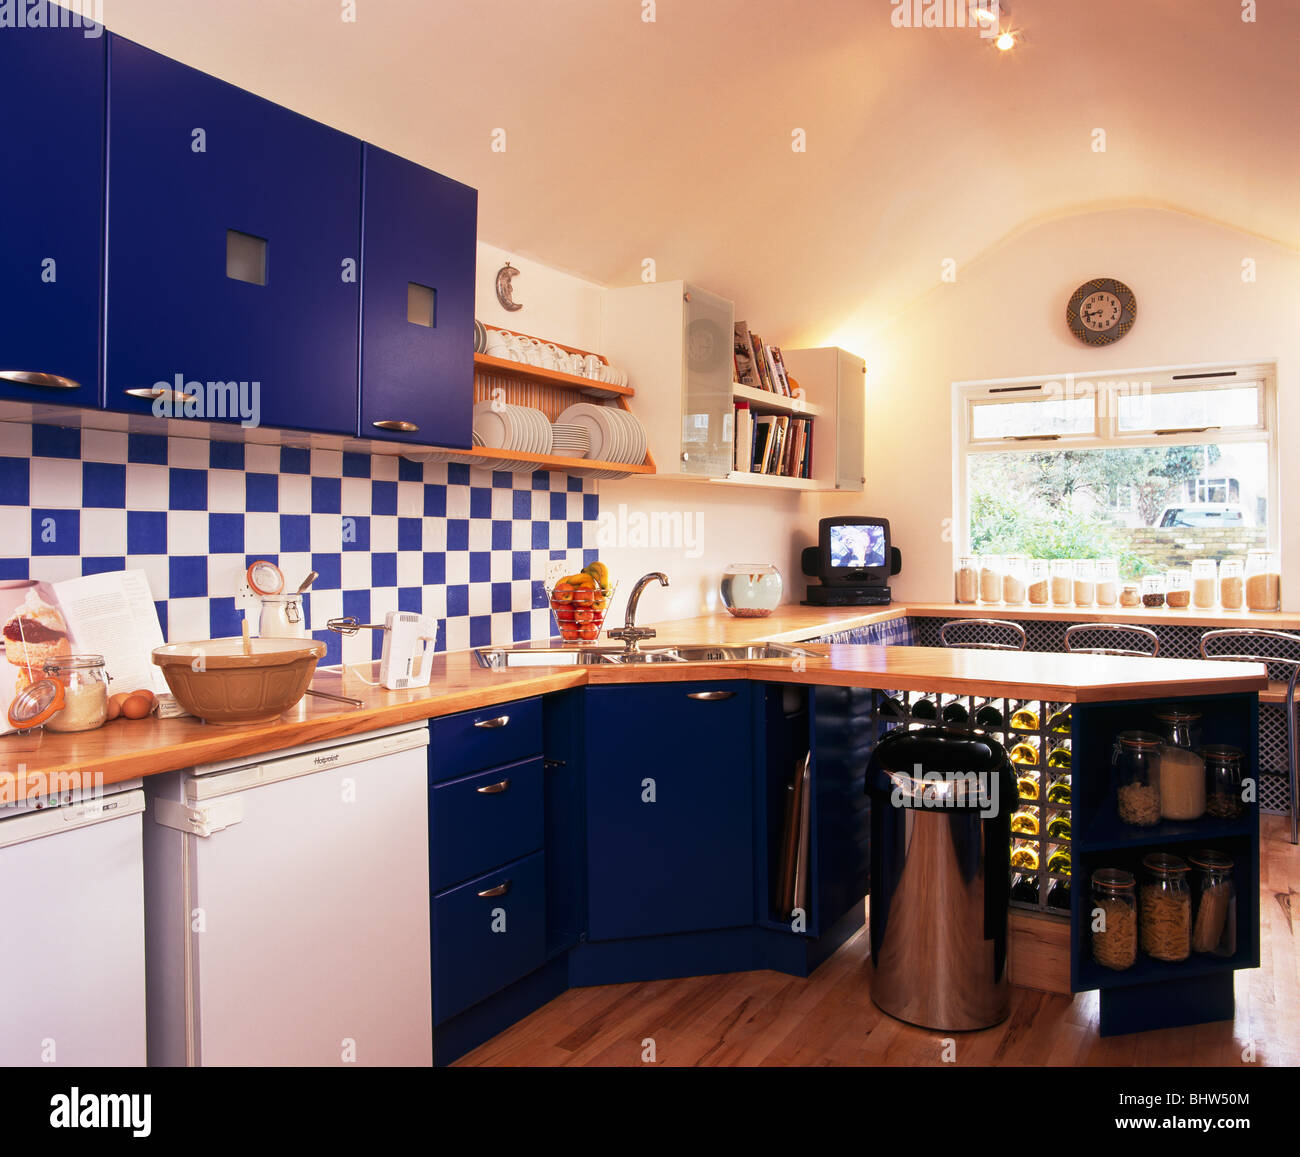 Blue+white wall tiles in modern kitchen with blue fitted cupboards ...